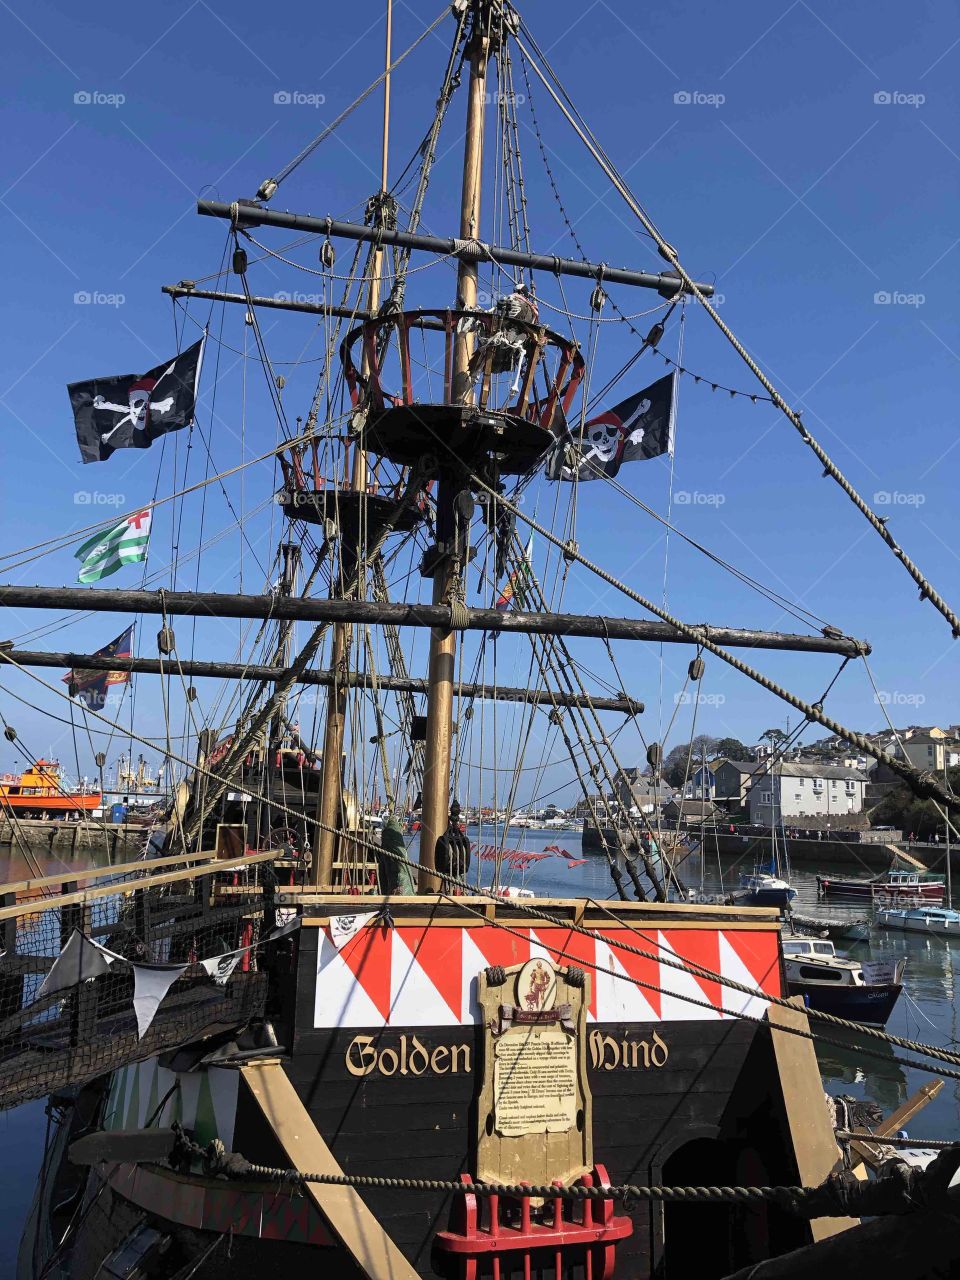 Close up feature of the famous “Golden Hind” vessel a permanent feature in Brixham Harbor, Devon,UK